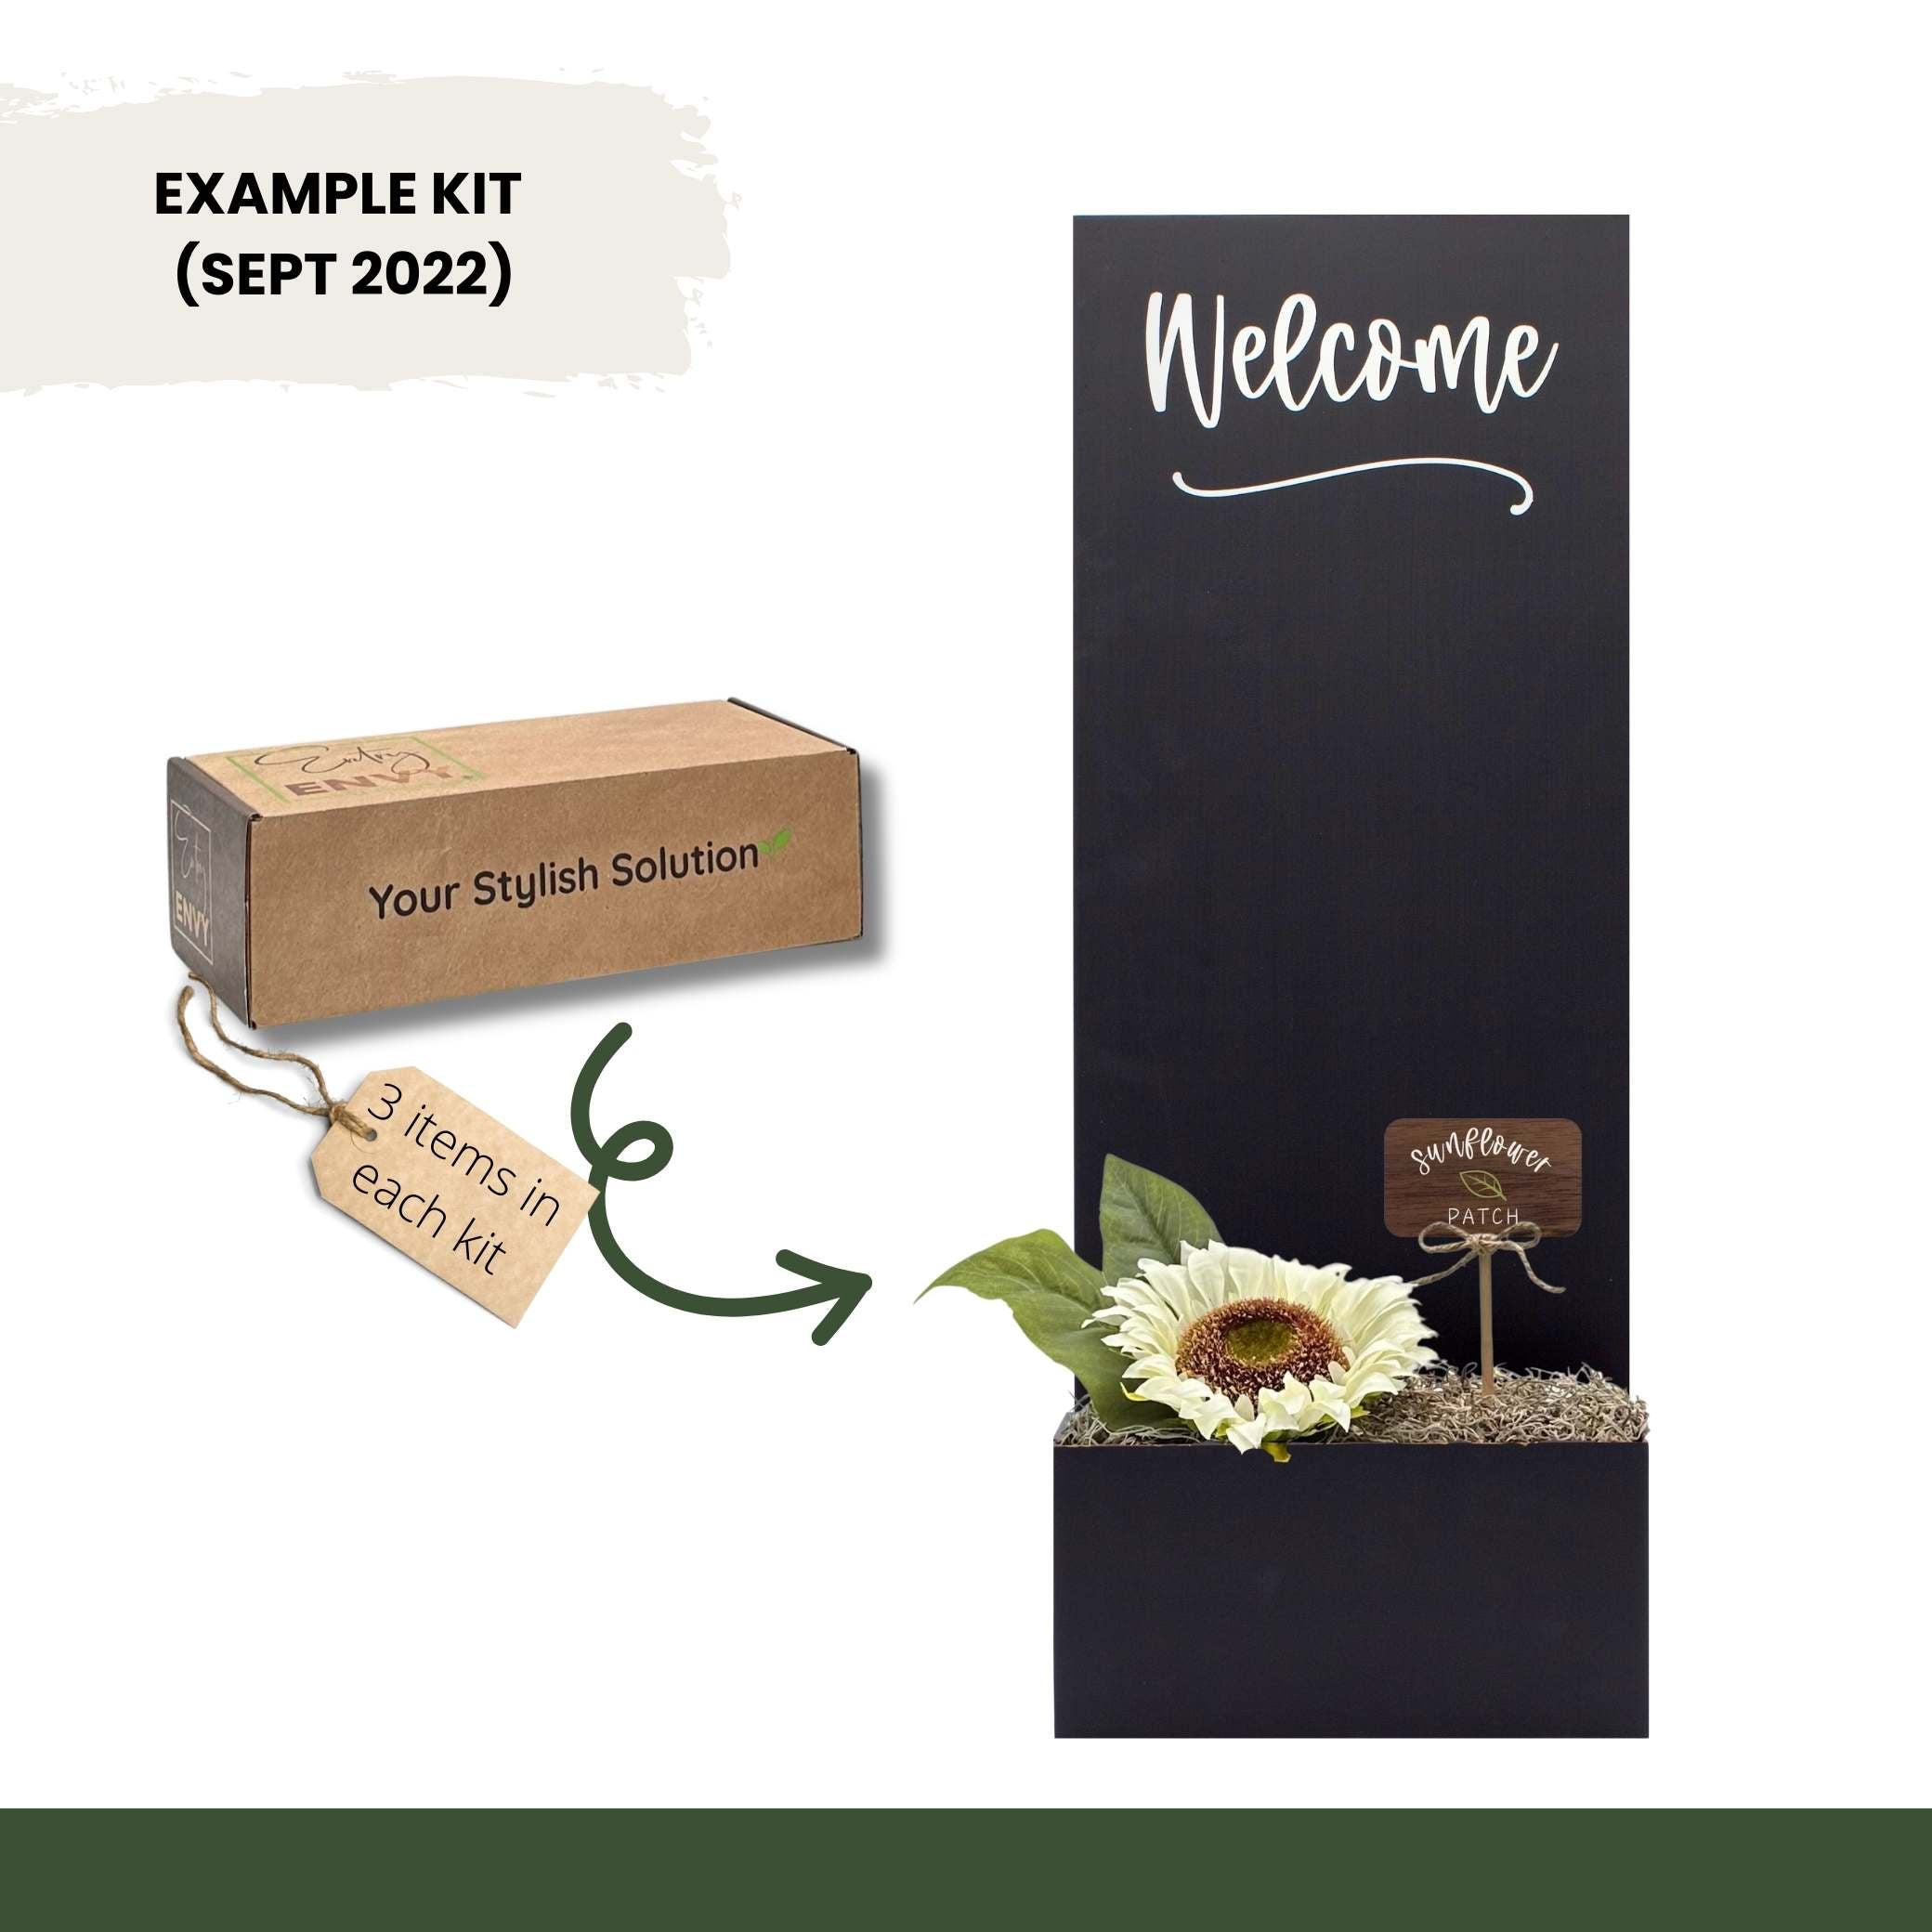 EXCLUSIVE DECOR KITS - GIFT SUBSCRIPTION